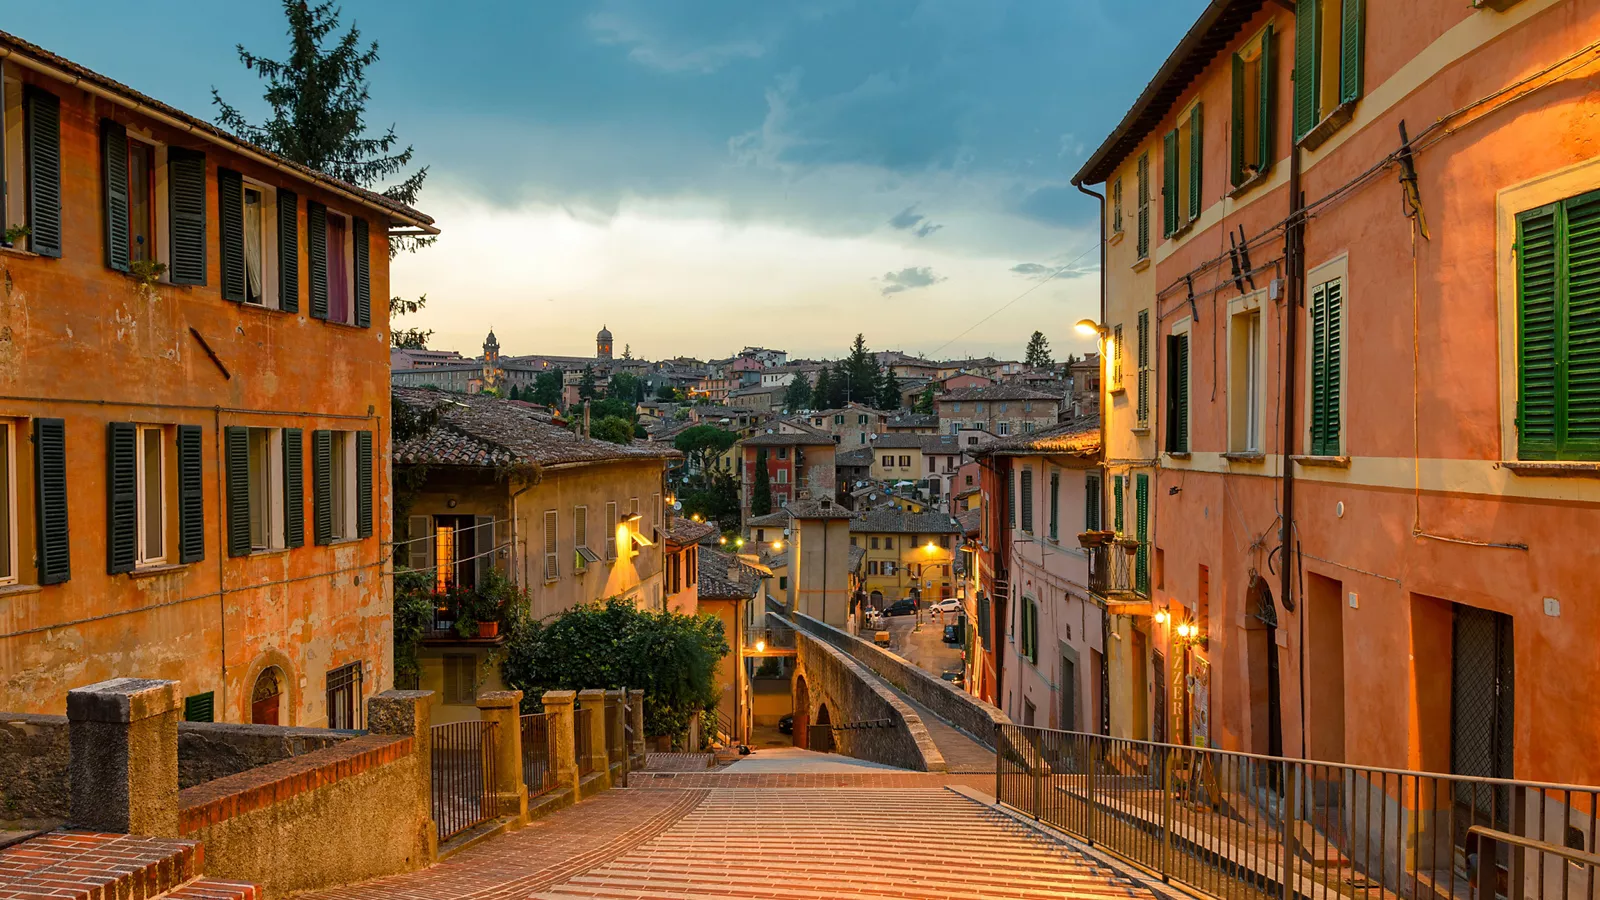 Perugia: a historical and artistic jewel and beacon of central Italy